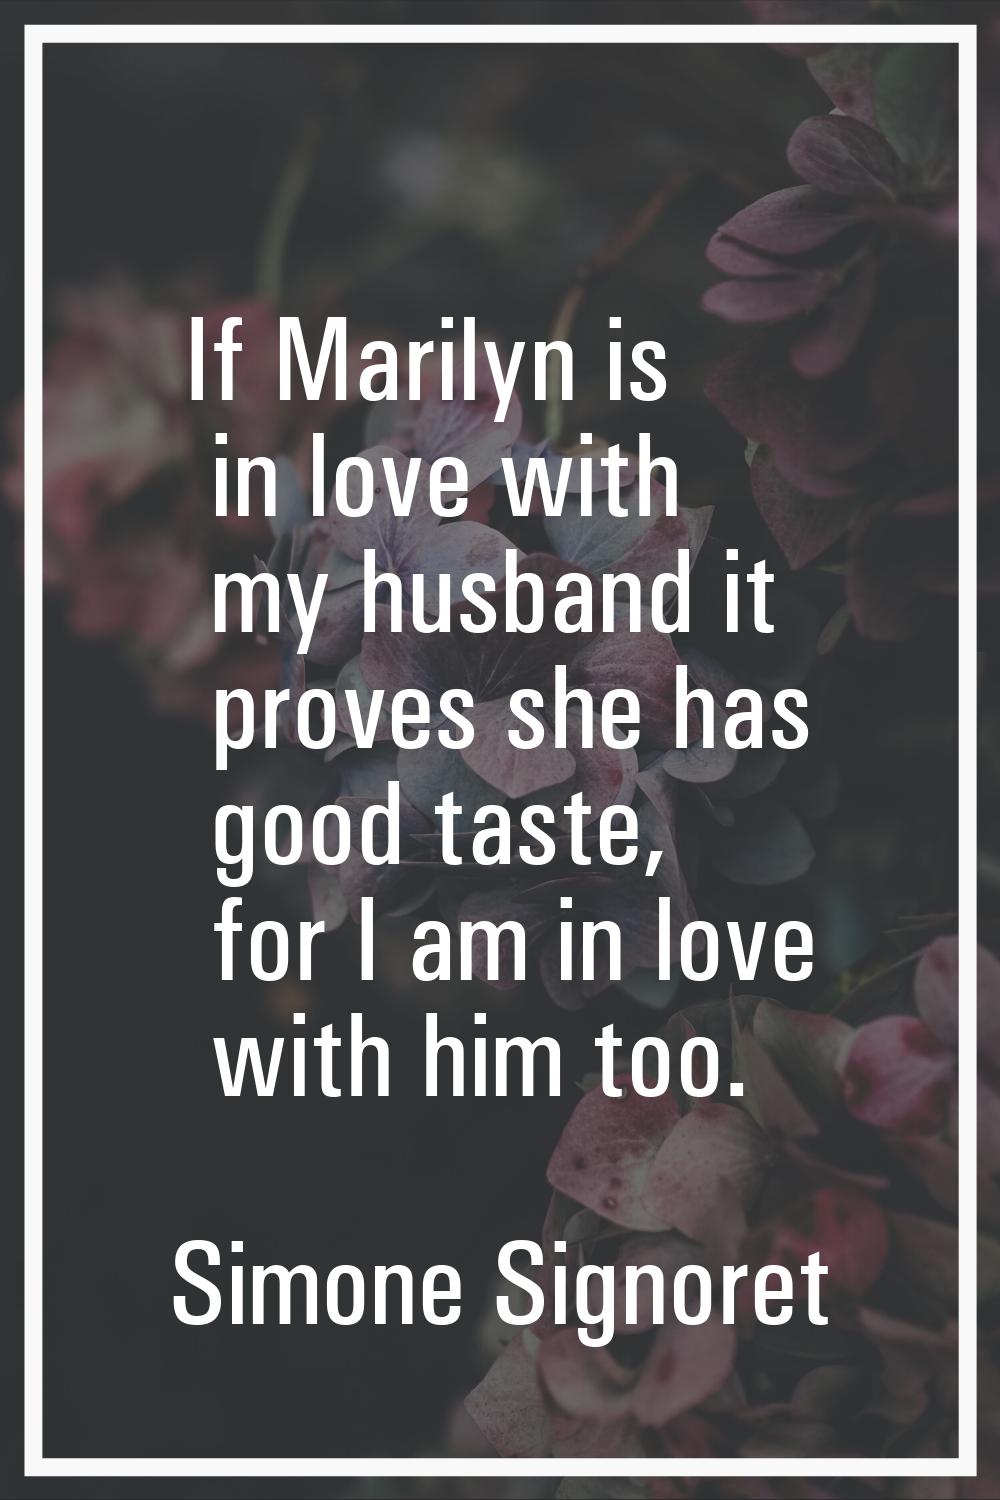 If Marilyn is in love with my husband it proves she has good taste, for I am in love with him too.